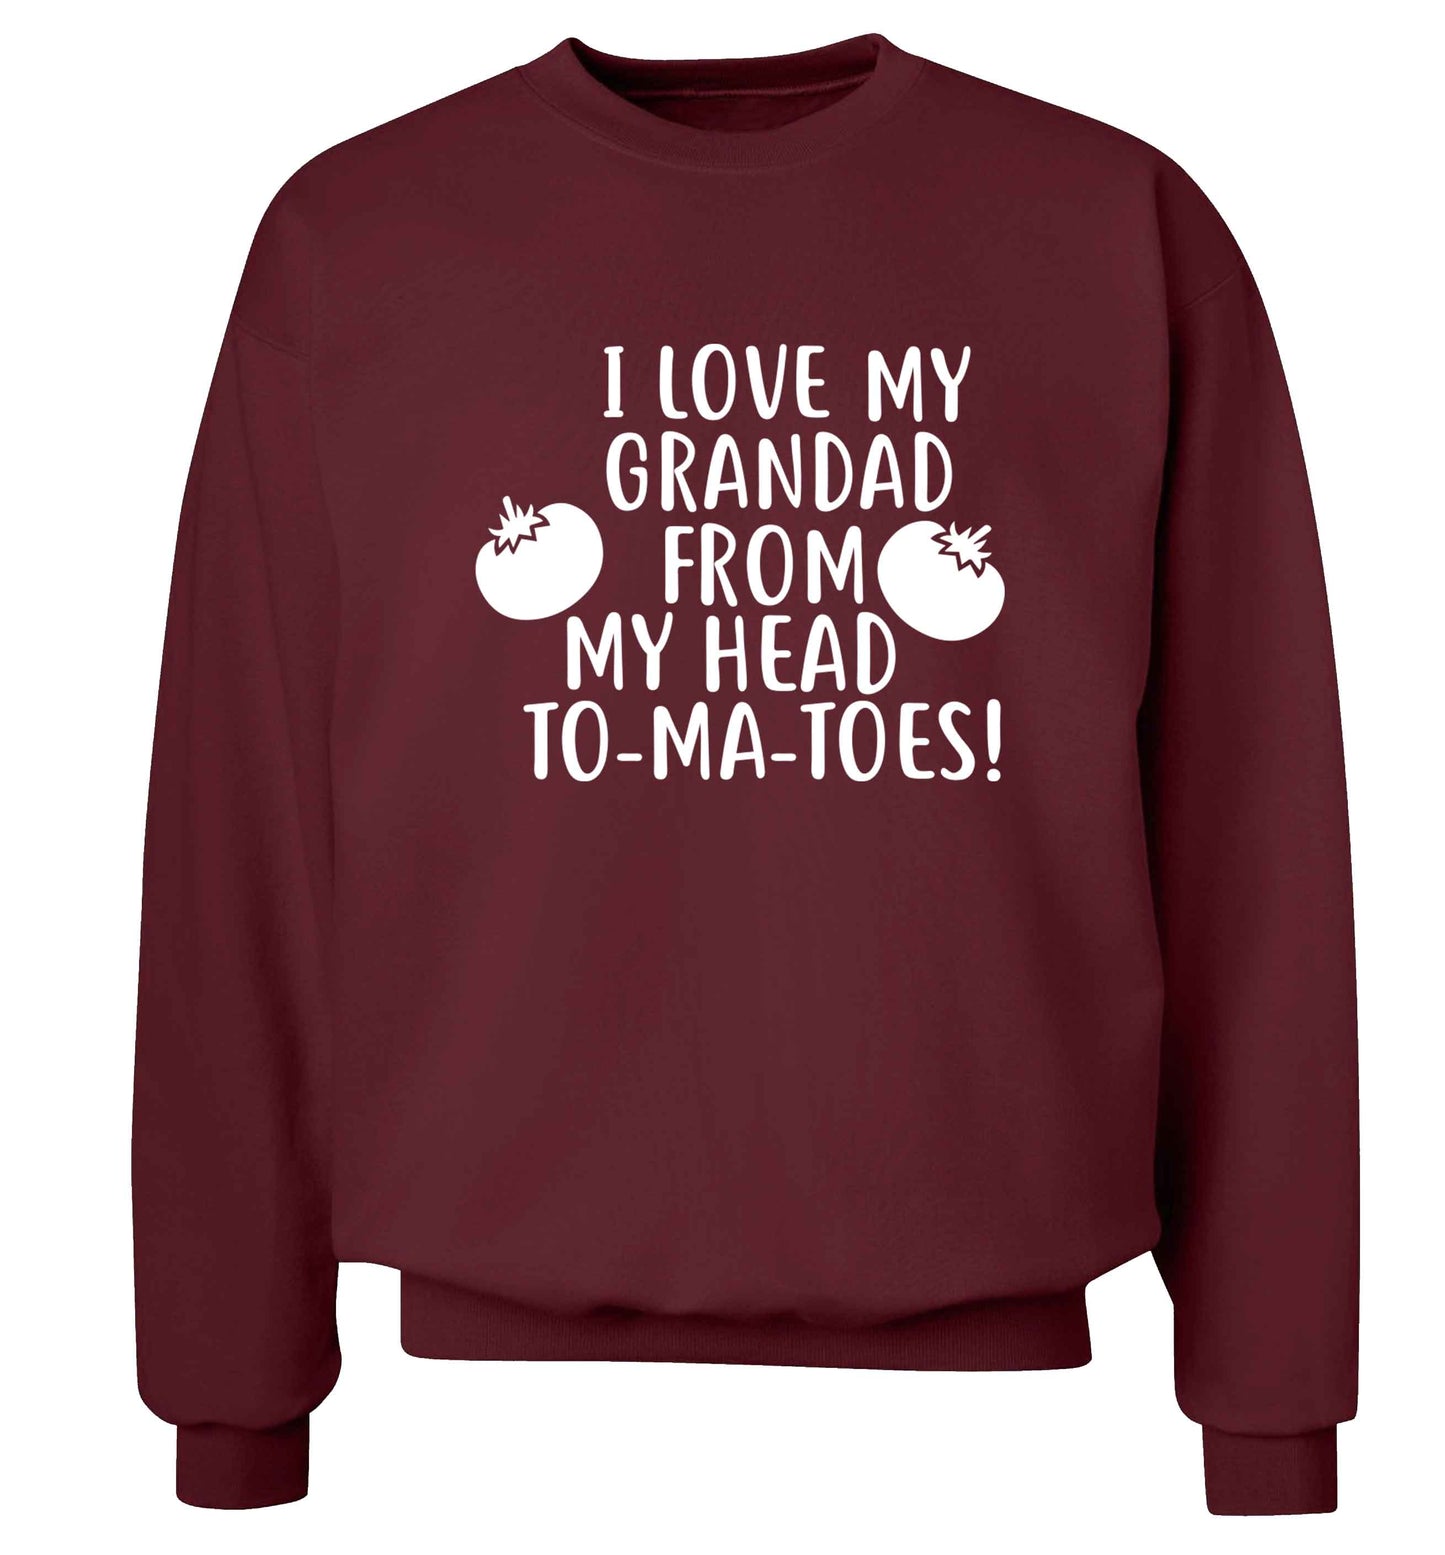 I love my grandad from my head To-Ma-Toes Adult's unisex maroon Sweater 2XL